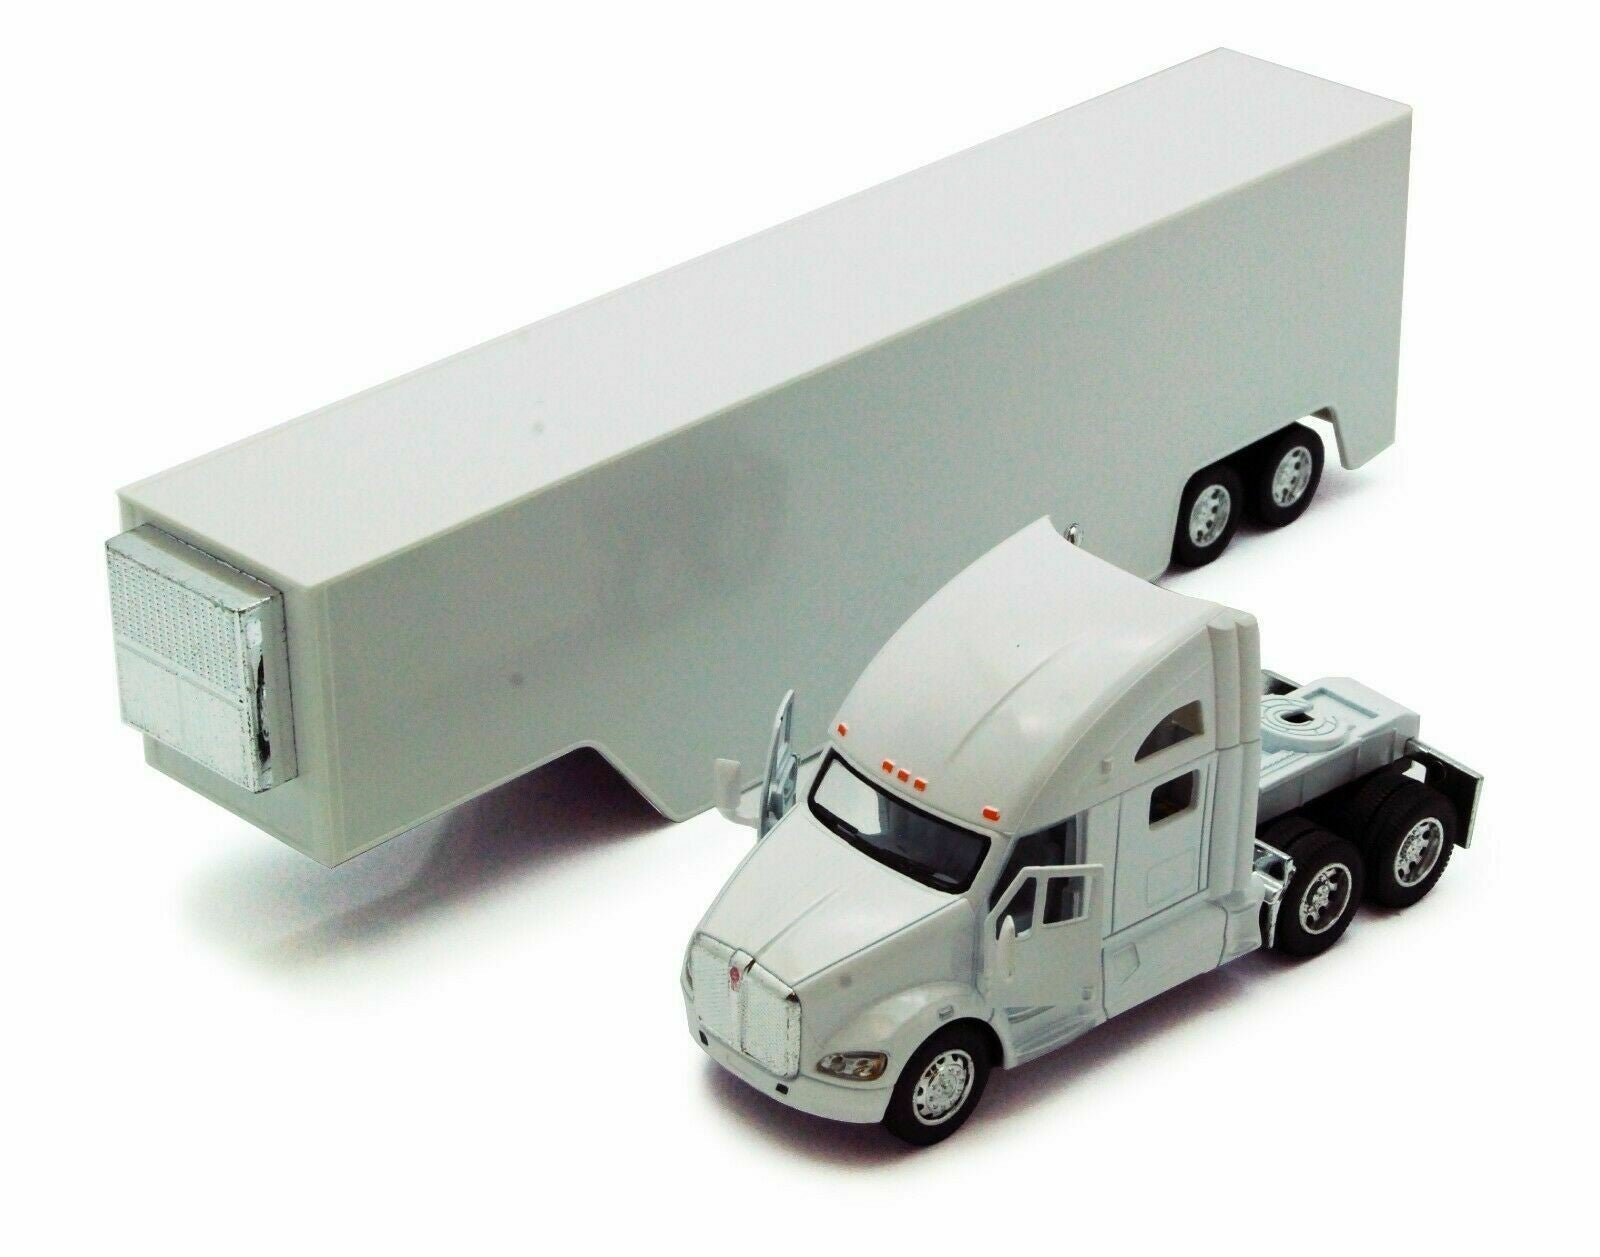  Kinsmart - Kenworth T700 Container Truck (1/68 scale die cast model car, White)